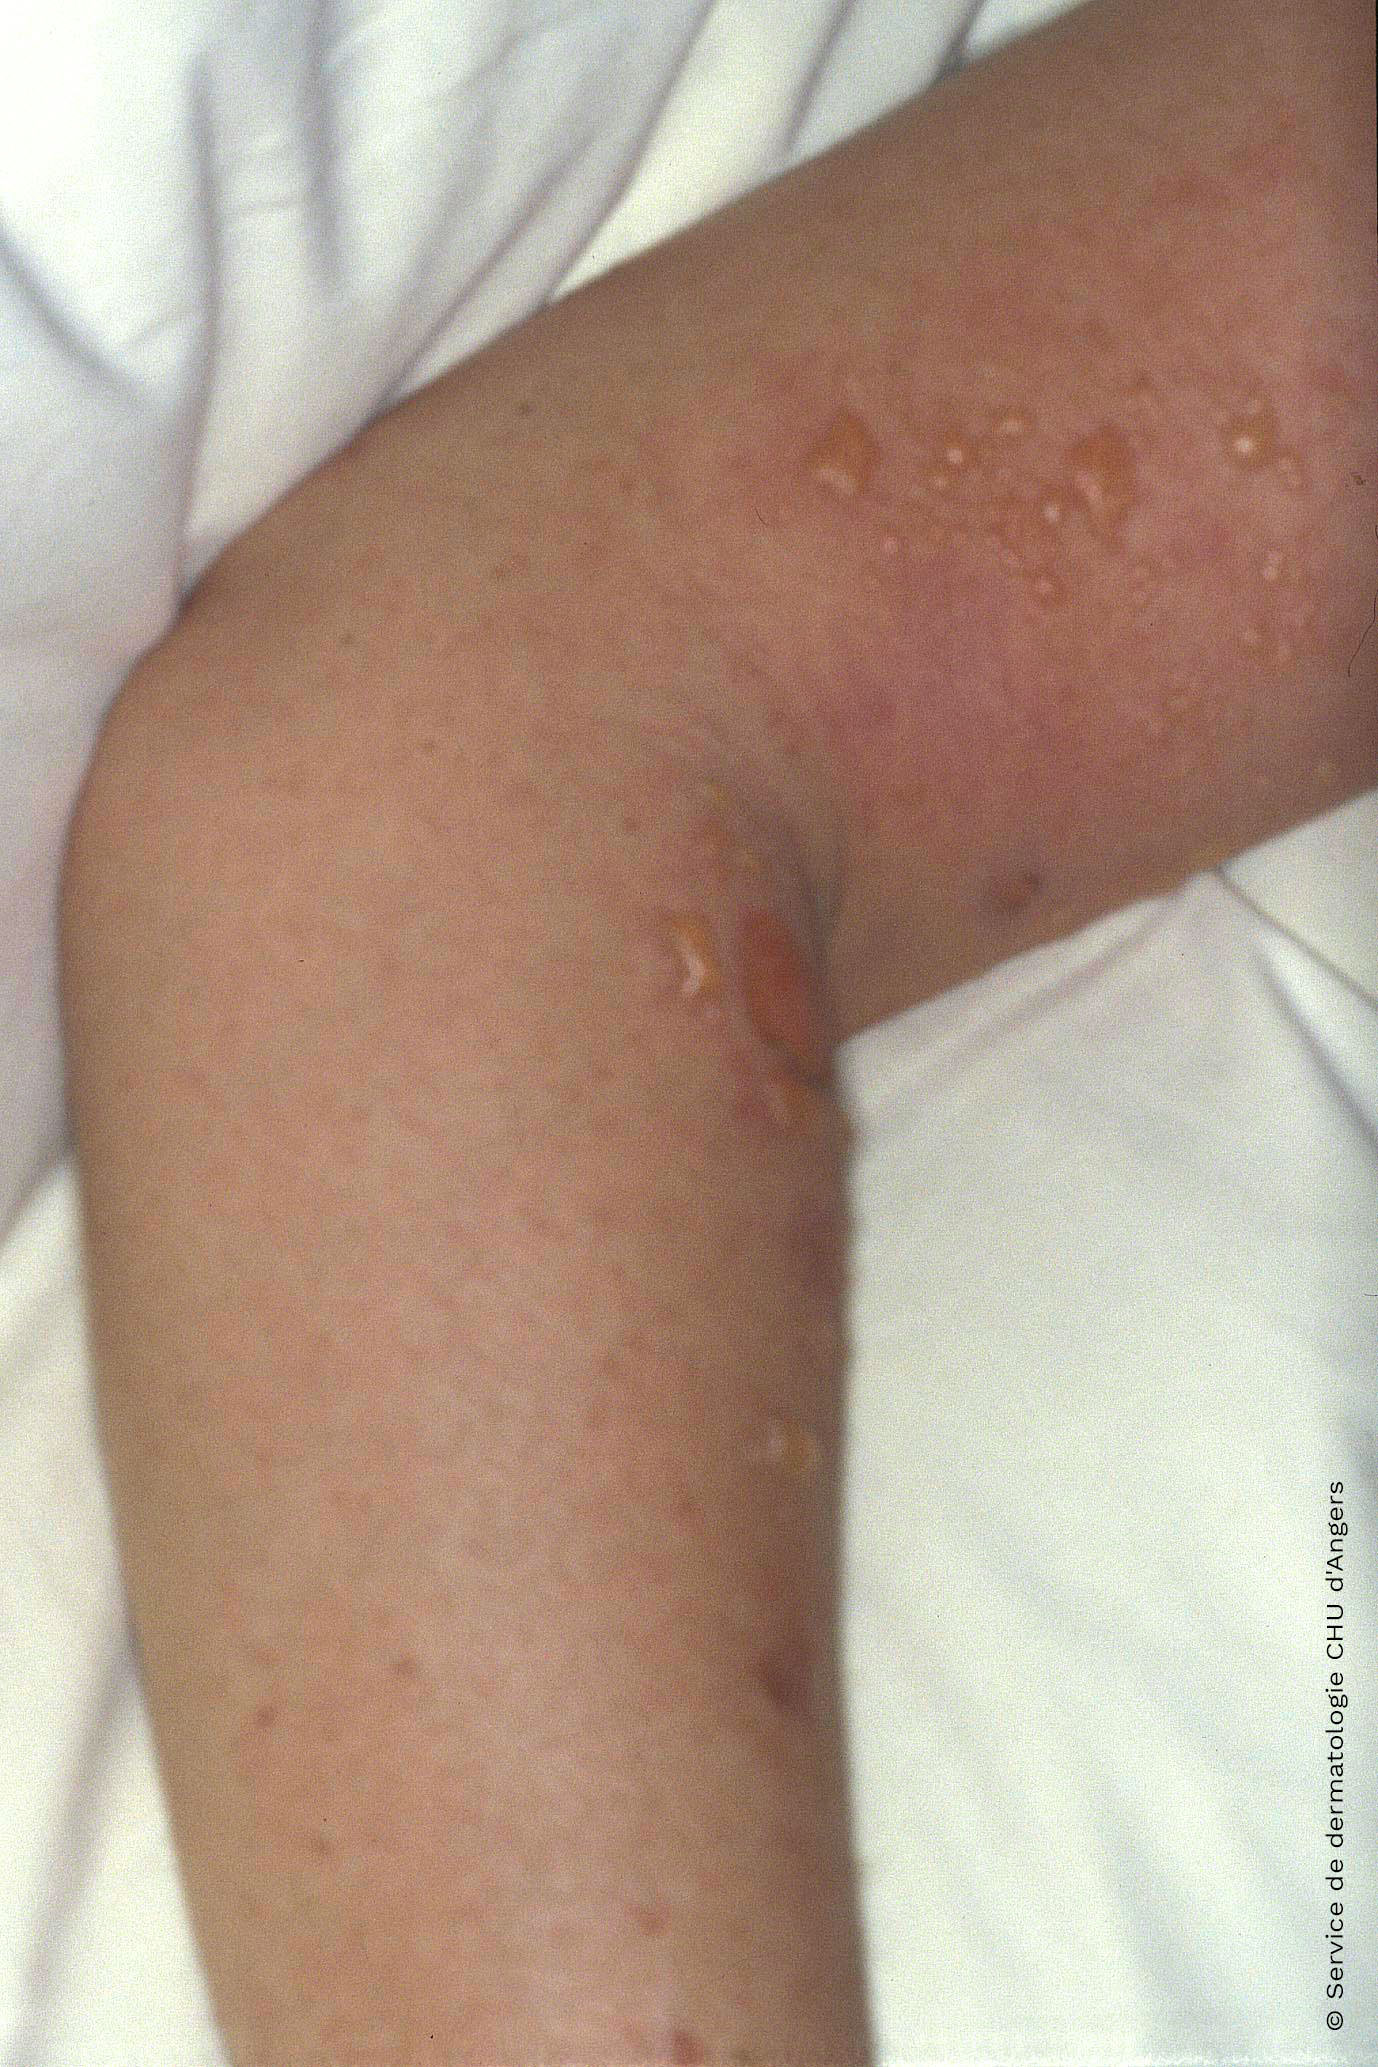 Acute contact eczema of the arm with ketoprofen